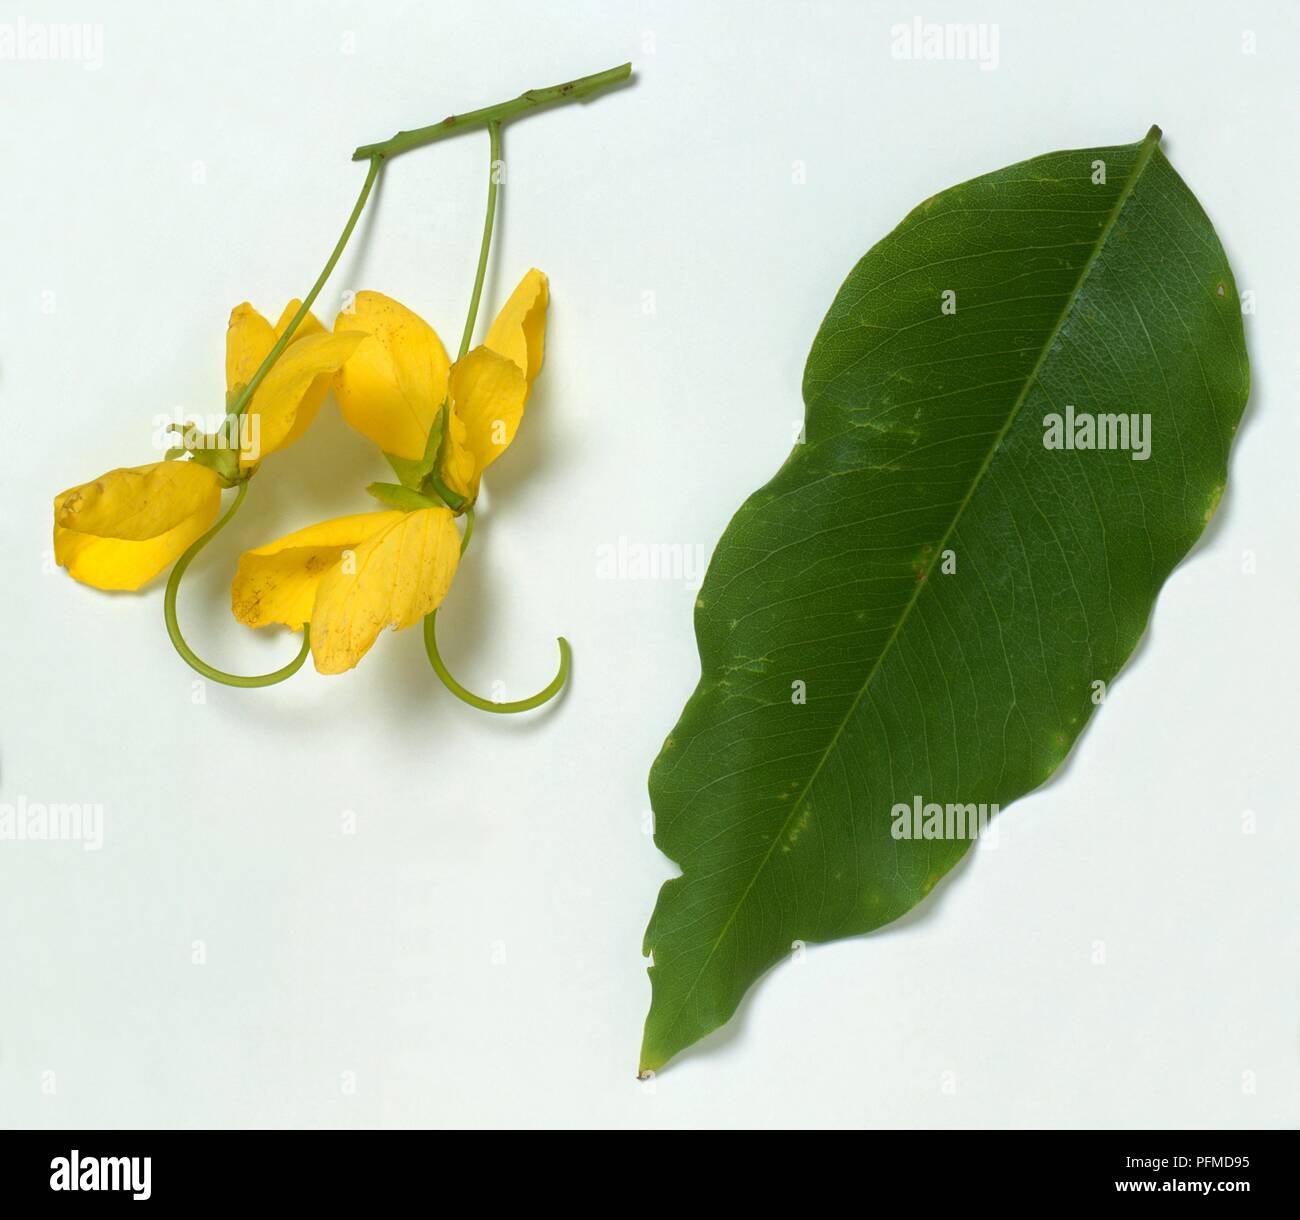 Indian laburnum (Cassia fistula), green leaf, and scented yellow flowers with embryonic seed pods Stock Photo